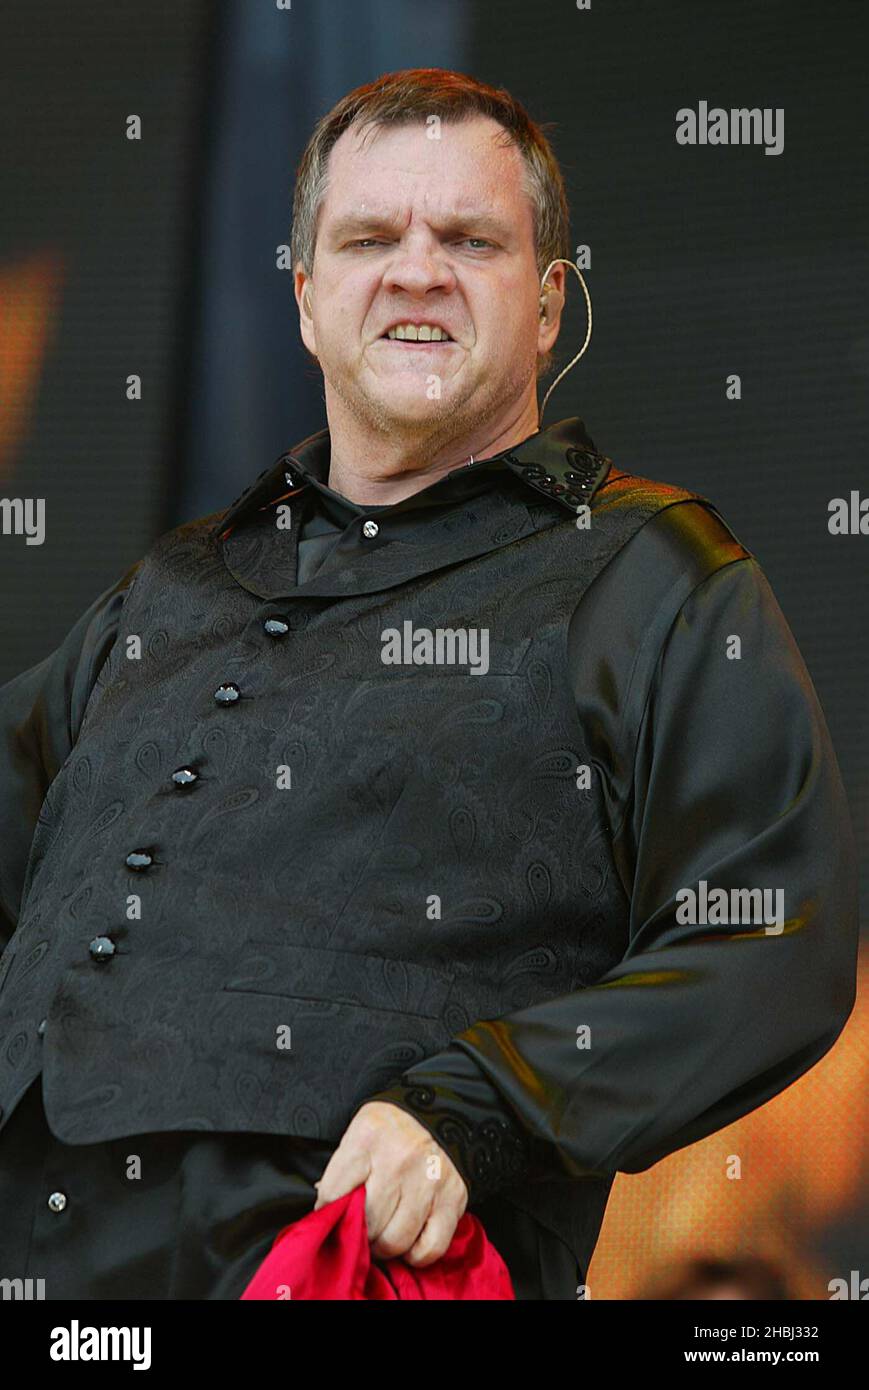 Meat Loaf performing live at the Capital FM Prince's Trust Party in the Park at Hyde Park London. Half length. Stock Photo